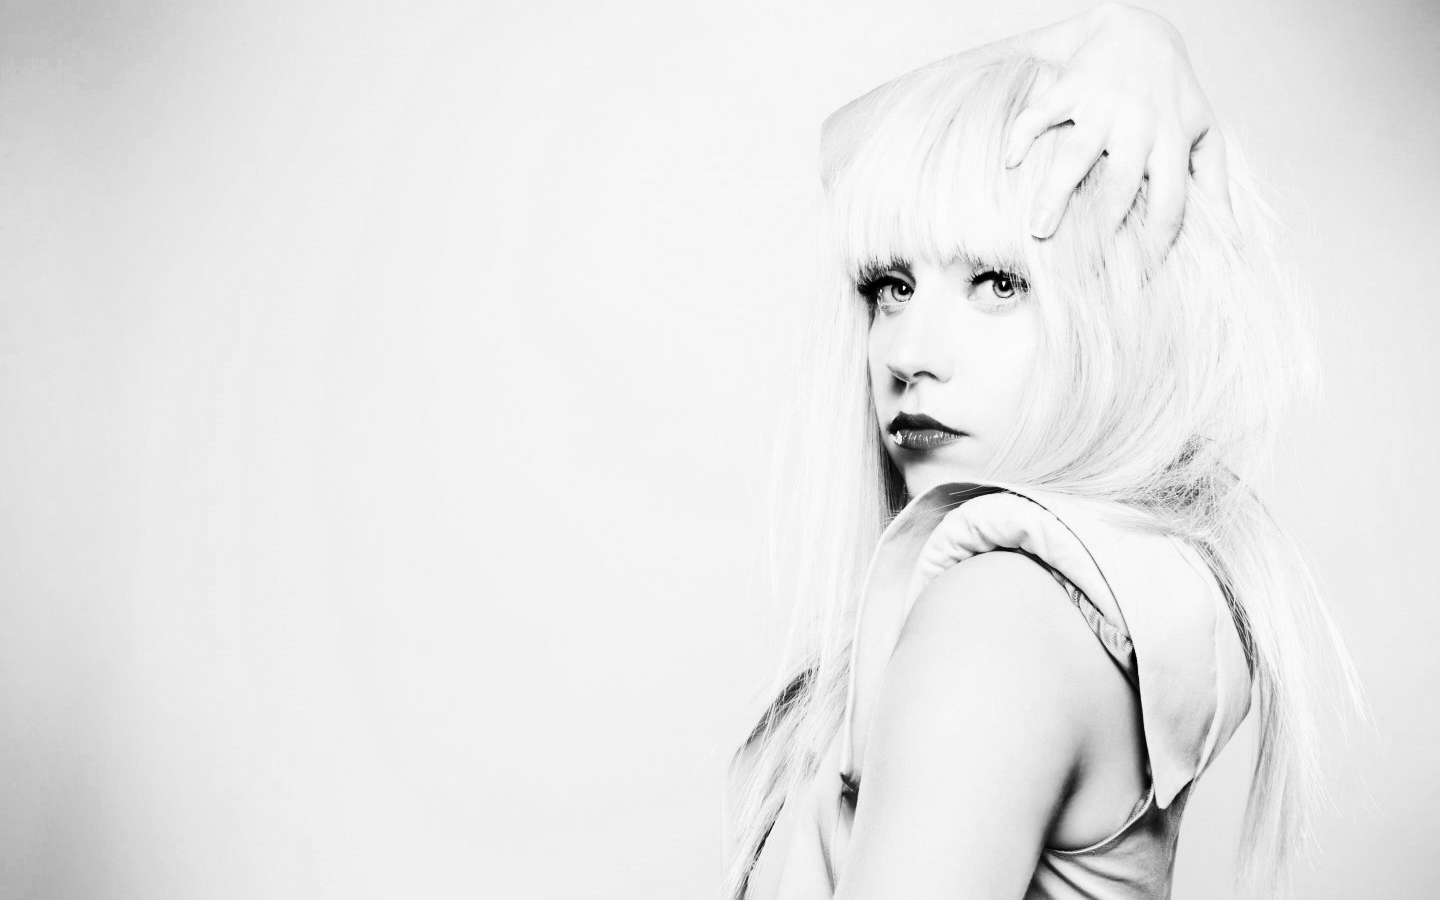 Lady Gaga Computer Wallpapers, Desktop Backgrounds | 1440x900 | ID ...